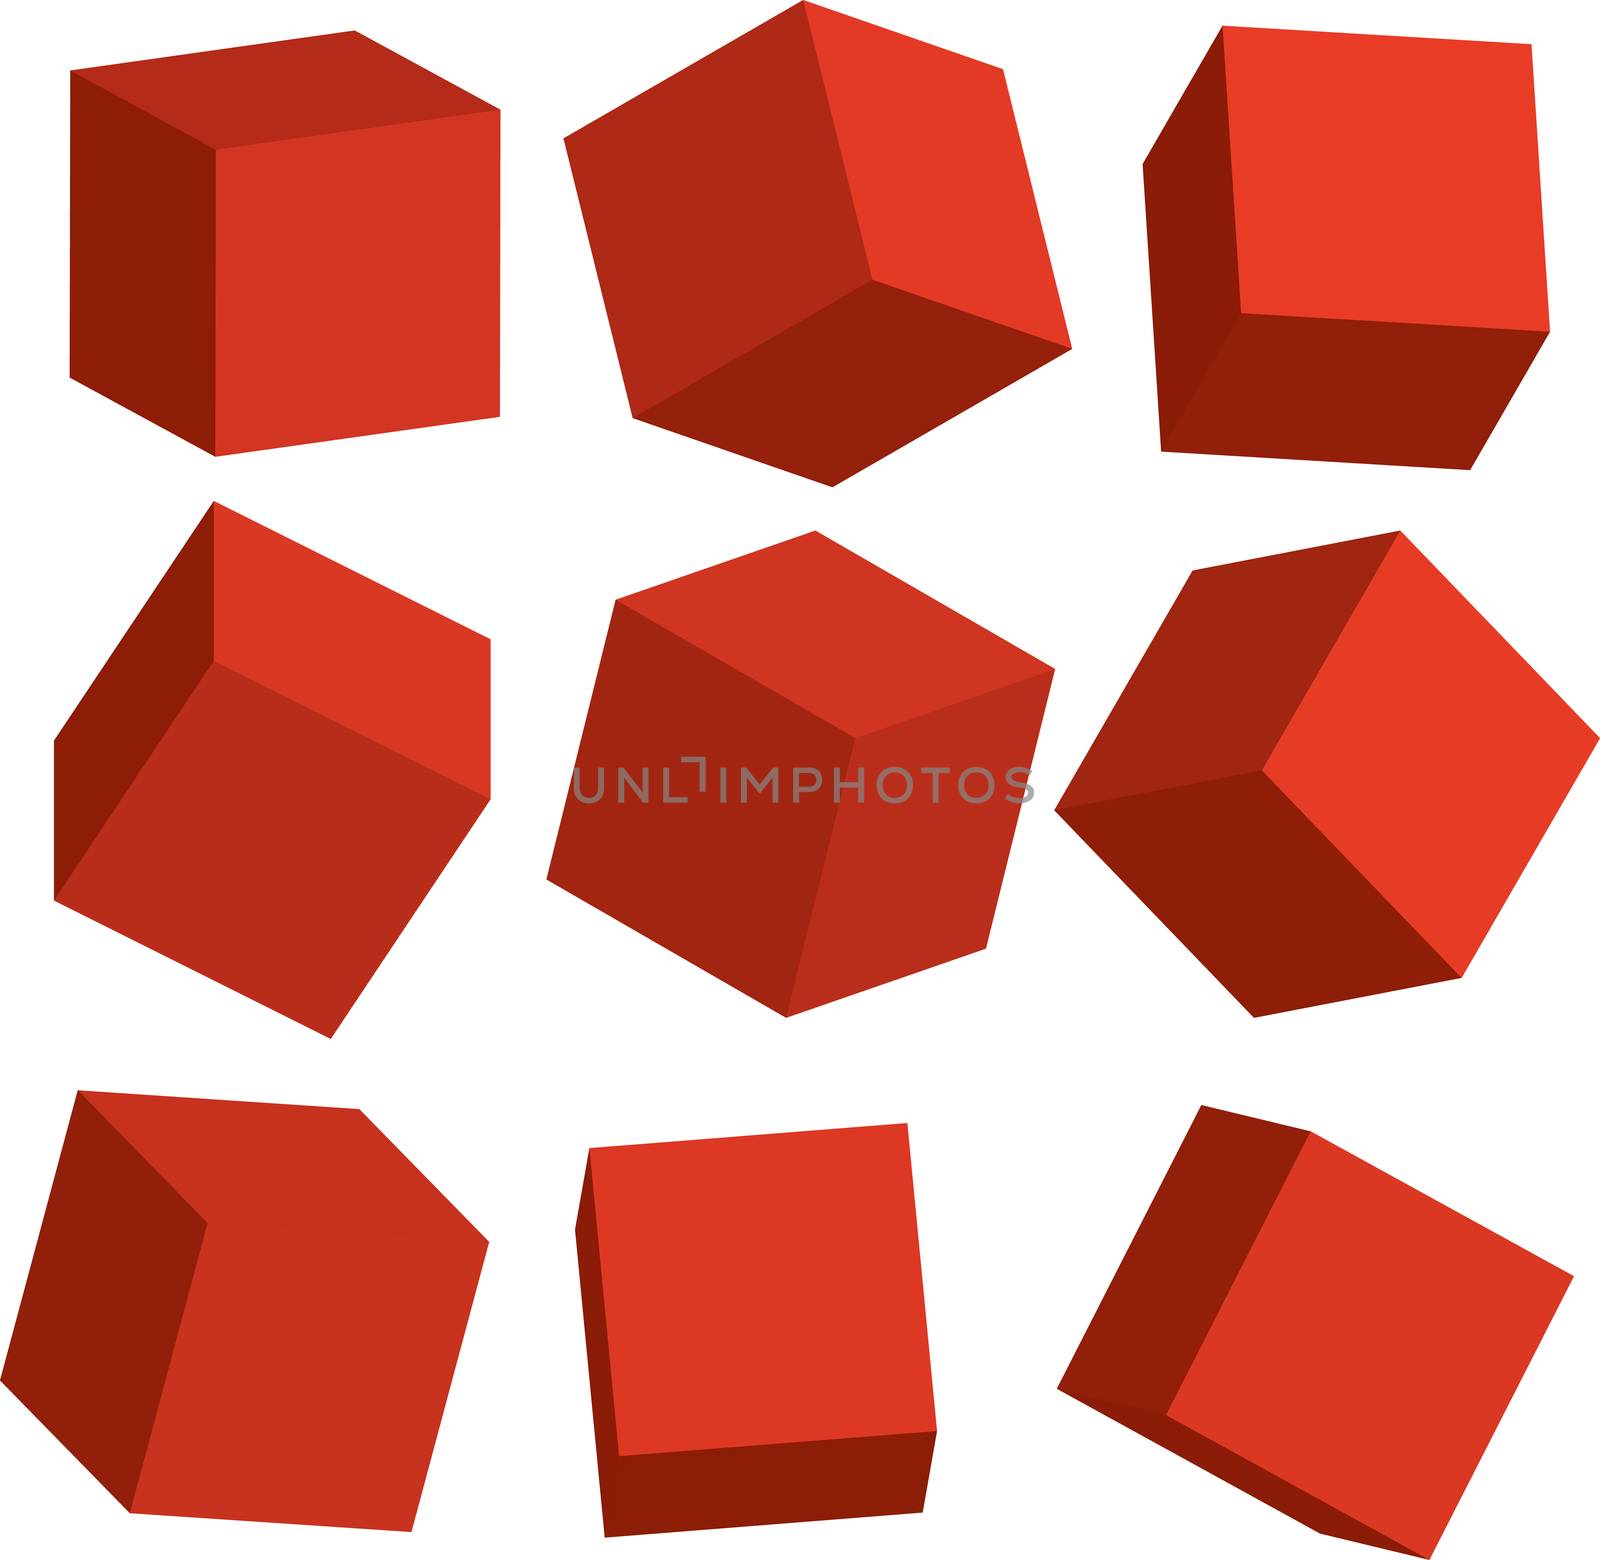 Illustration of Red 3D cubes in different positions by DragonEyeMedia